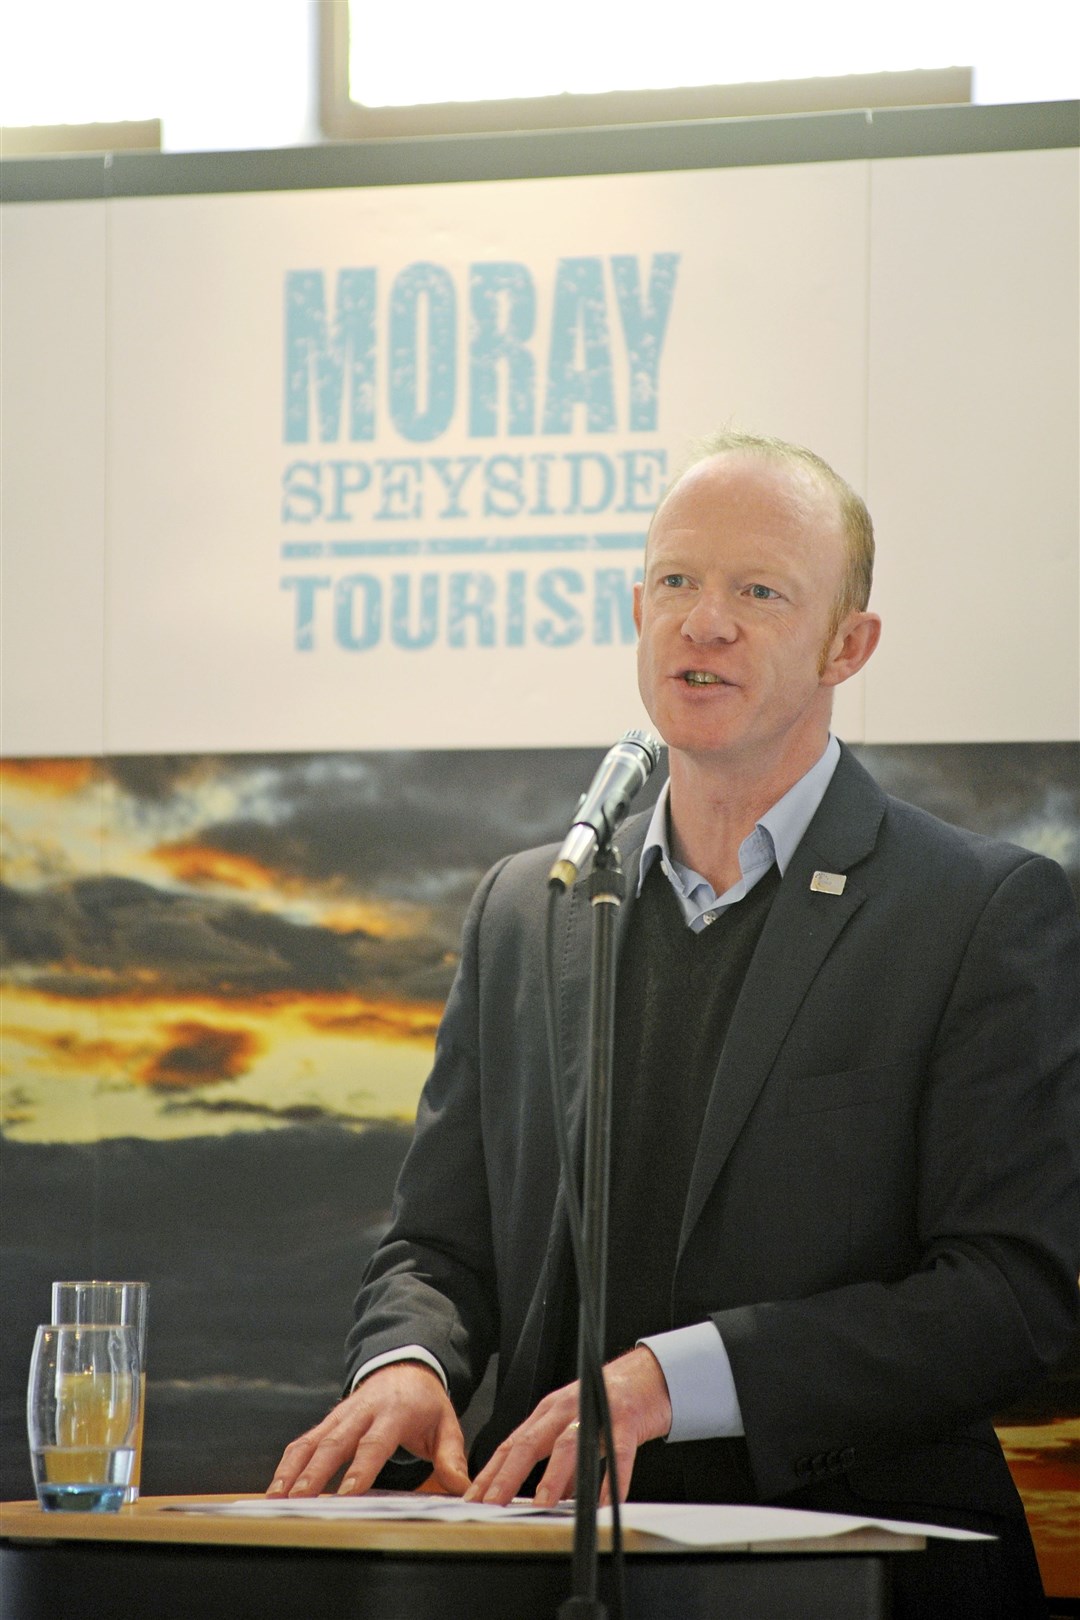 Laurie Piper of Moray Speyside Tourism.